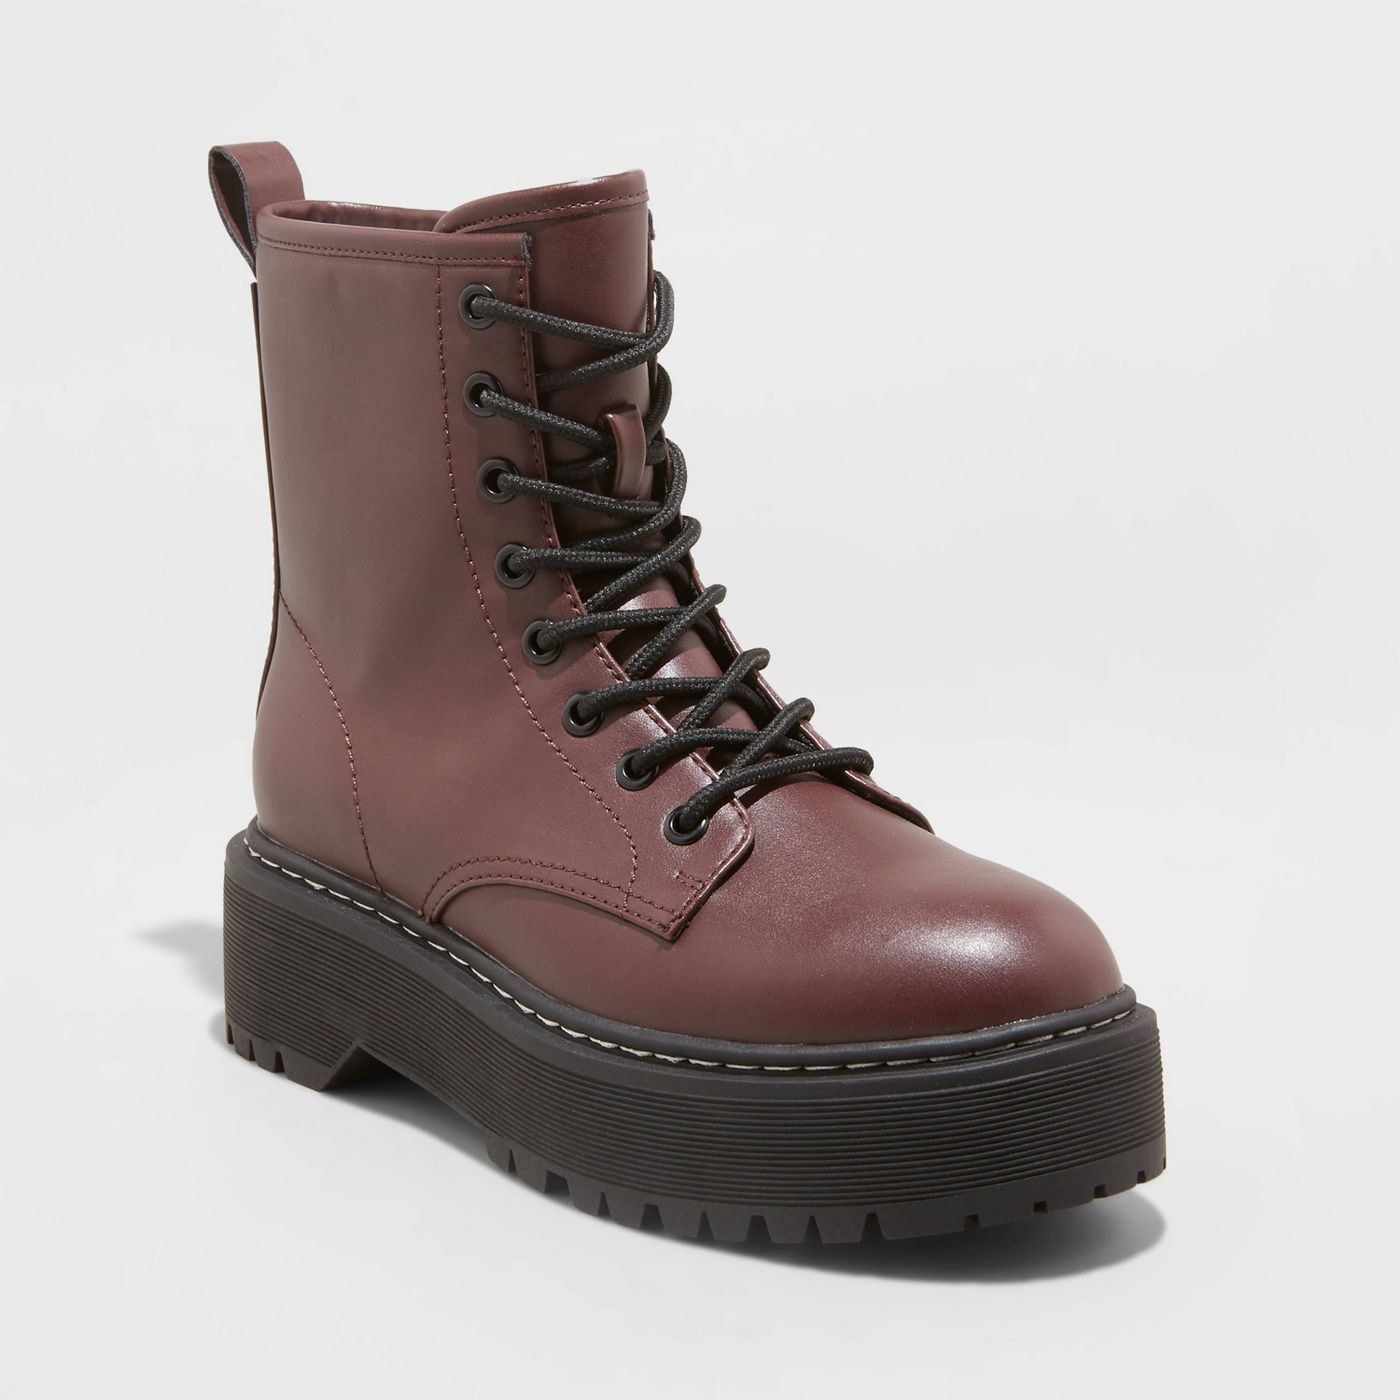 burgundy lace up combat boot